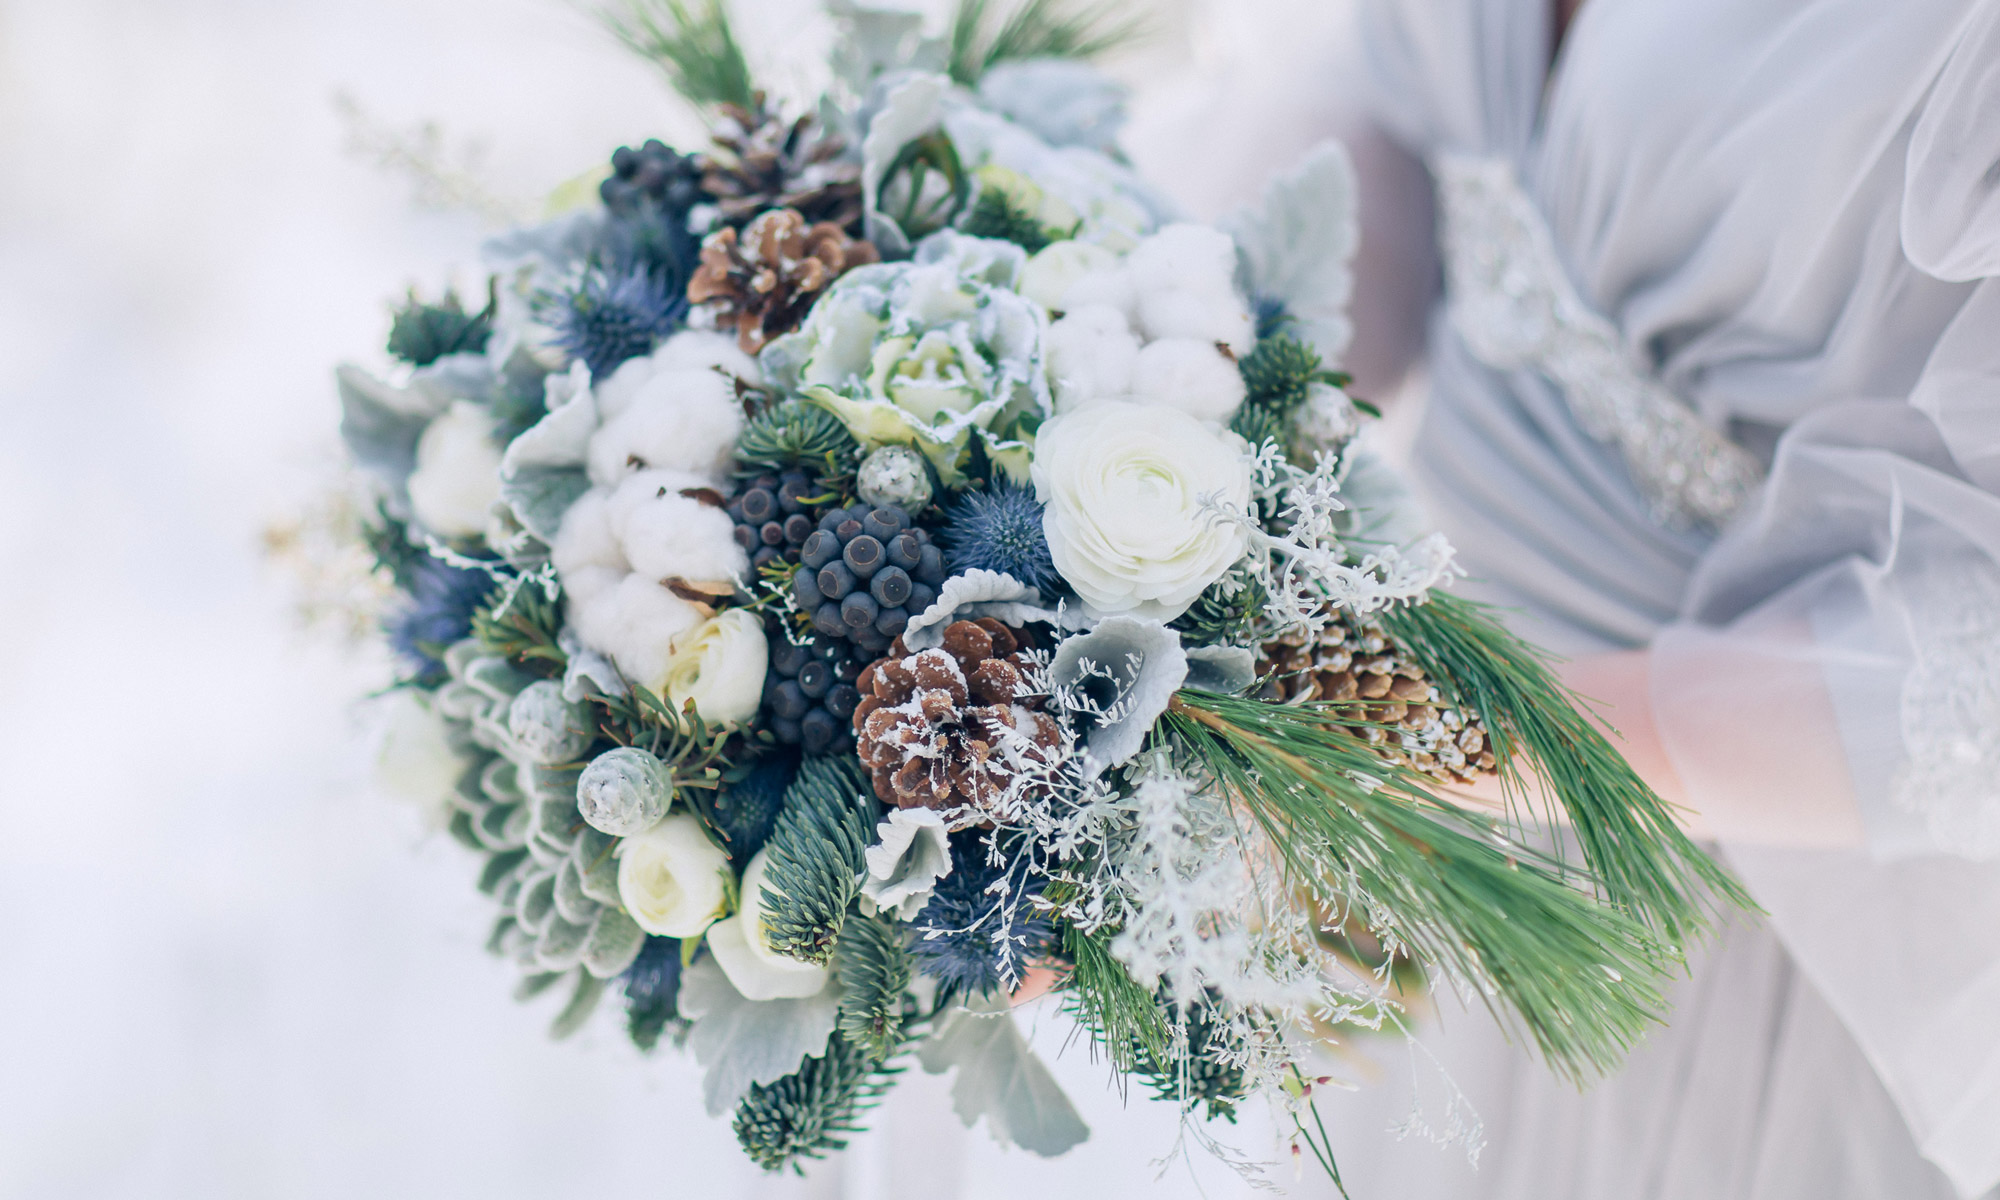 Your Winter Wedding Doesn’t Have to Look Like a Holiday Party